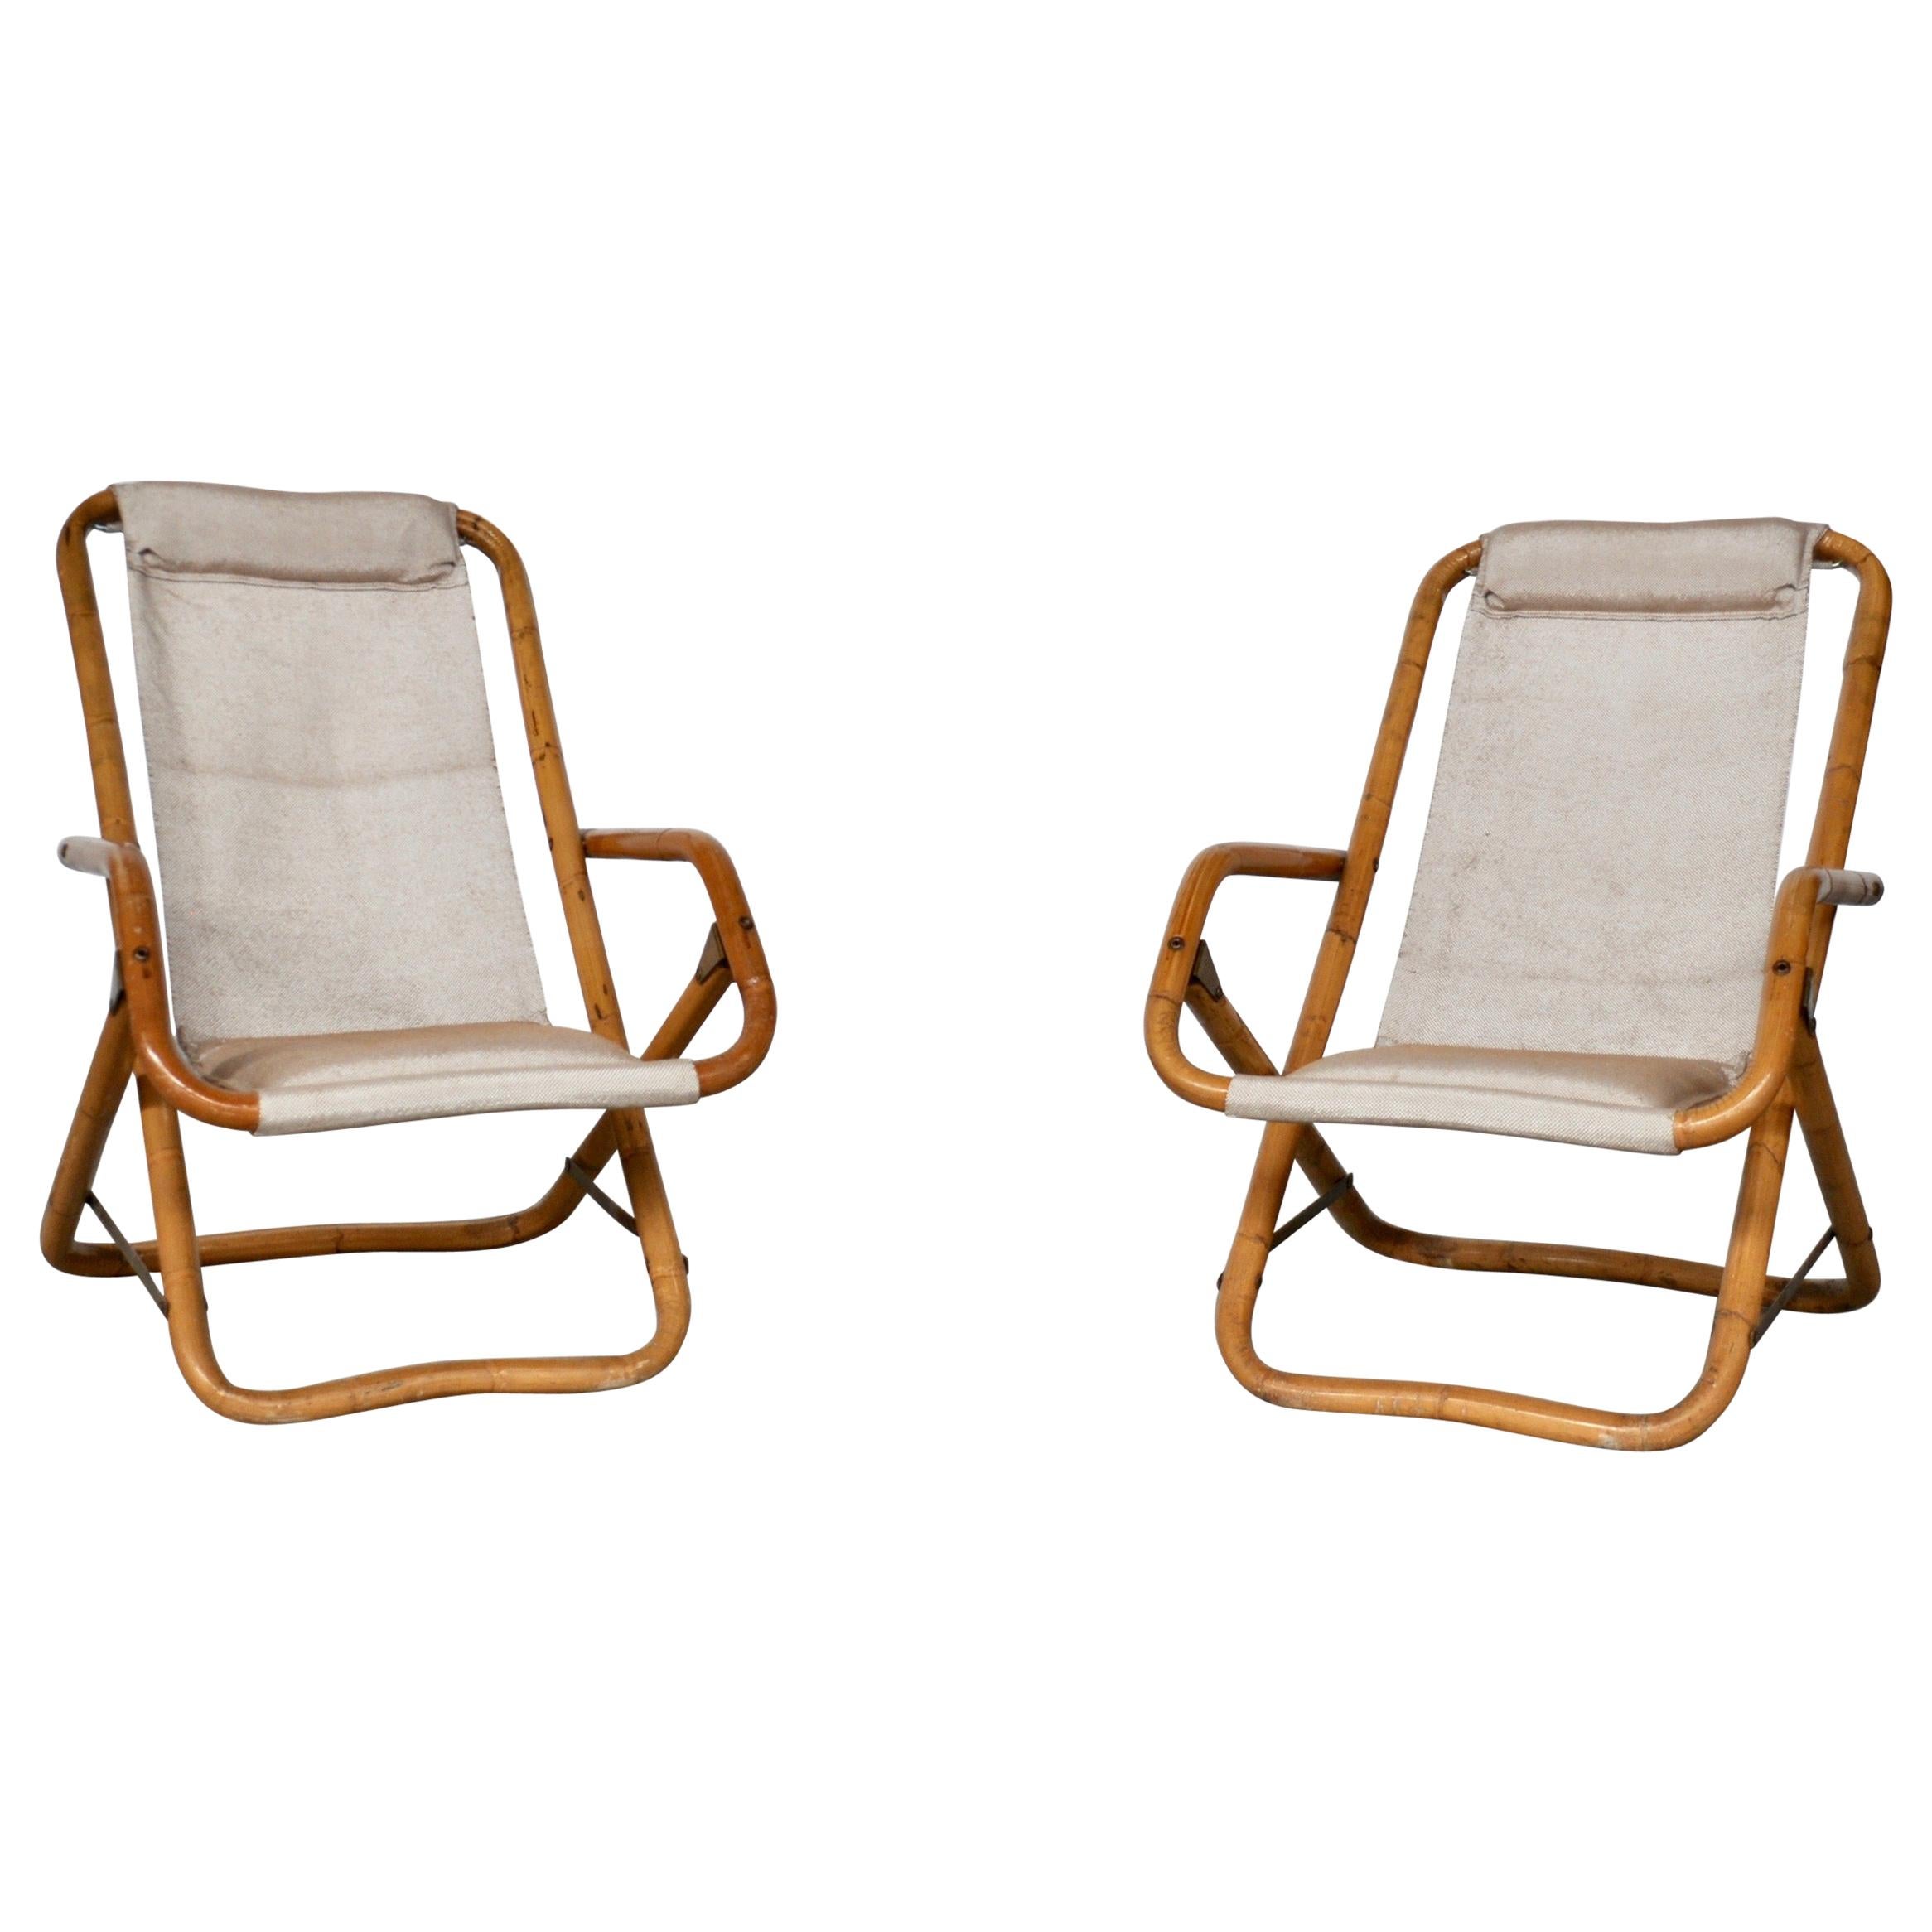 Reclinable and Oscilanting Faux Bamboo Seats, Italy, 1960s For Sale